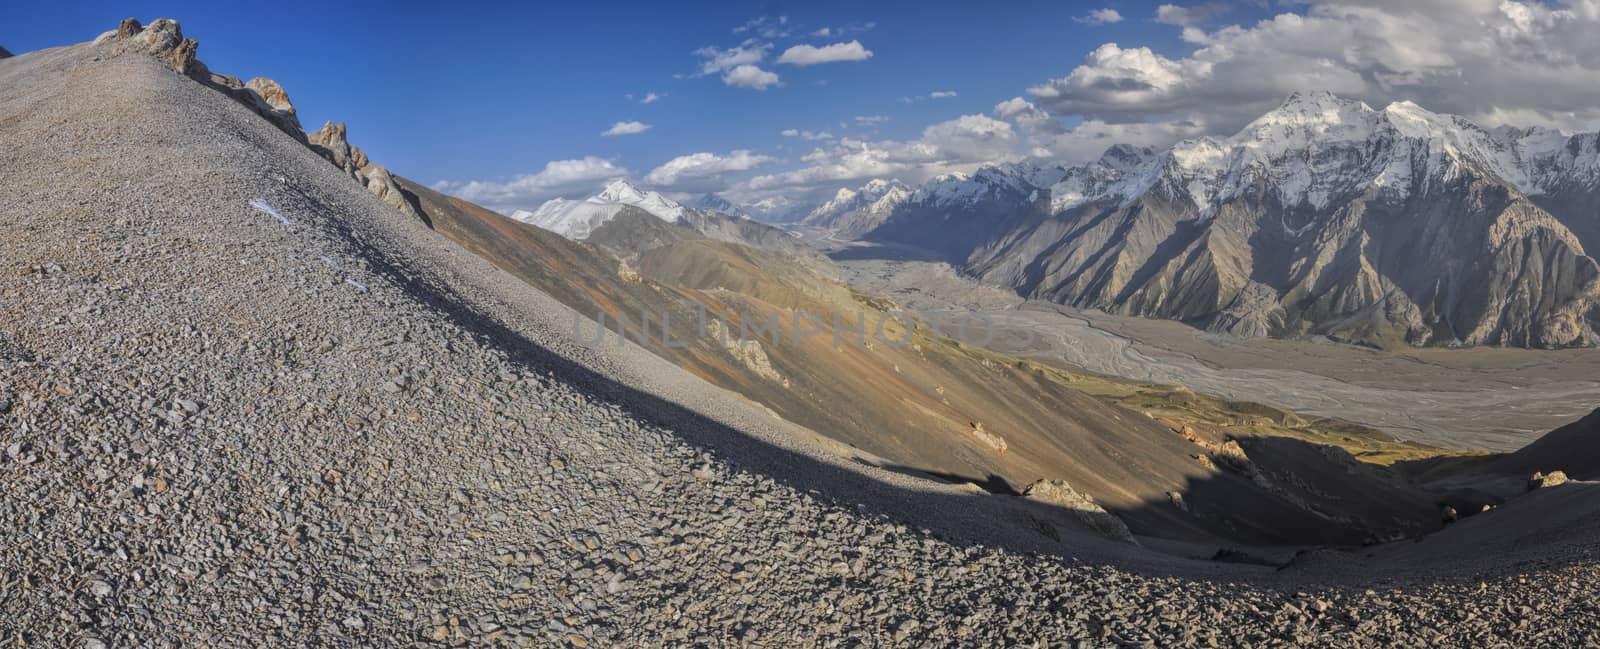 Scenic panorama of valley and mountain peaks in Tien-Shan mountain range in Kyrgyzstan